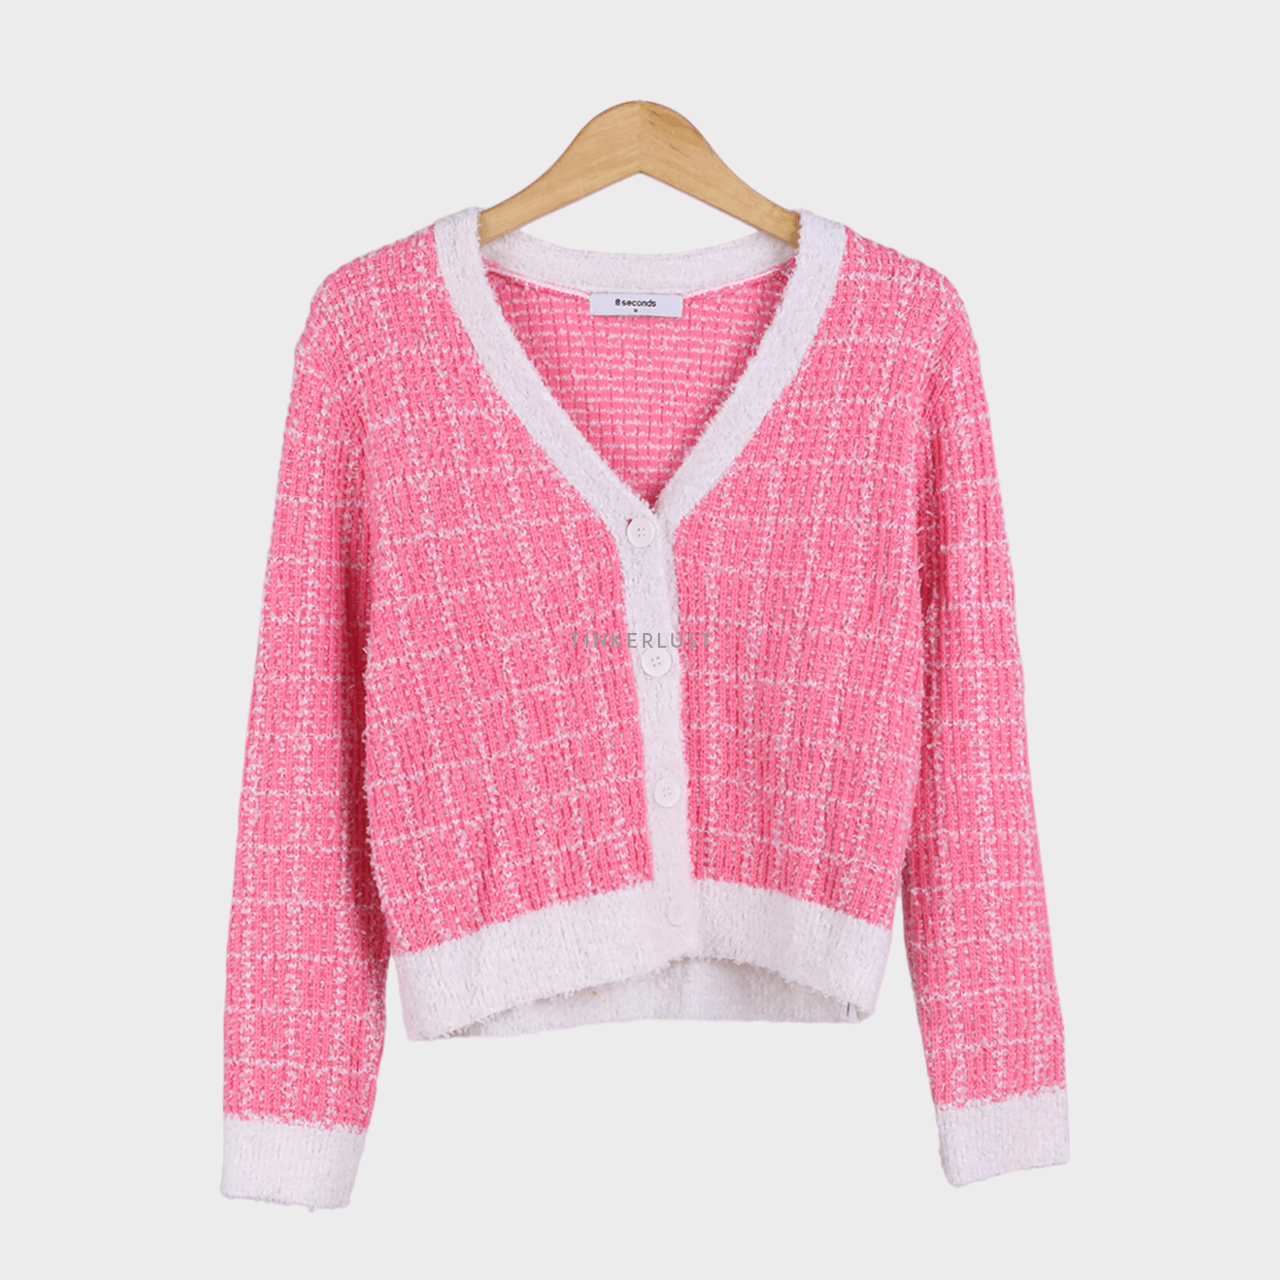 8 Seconds Pink & White Cardigan